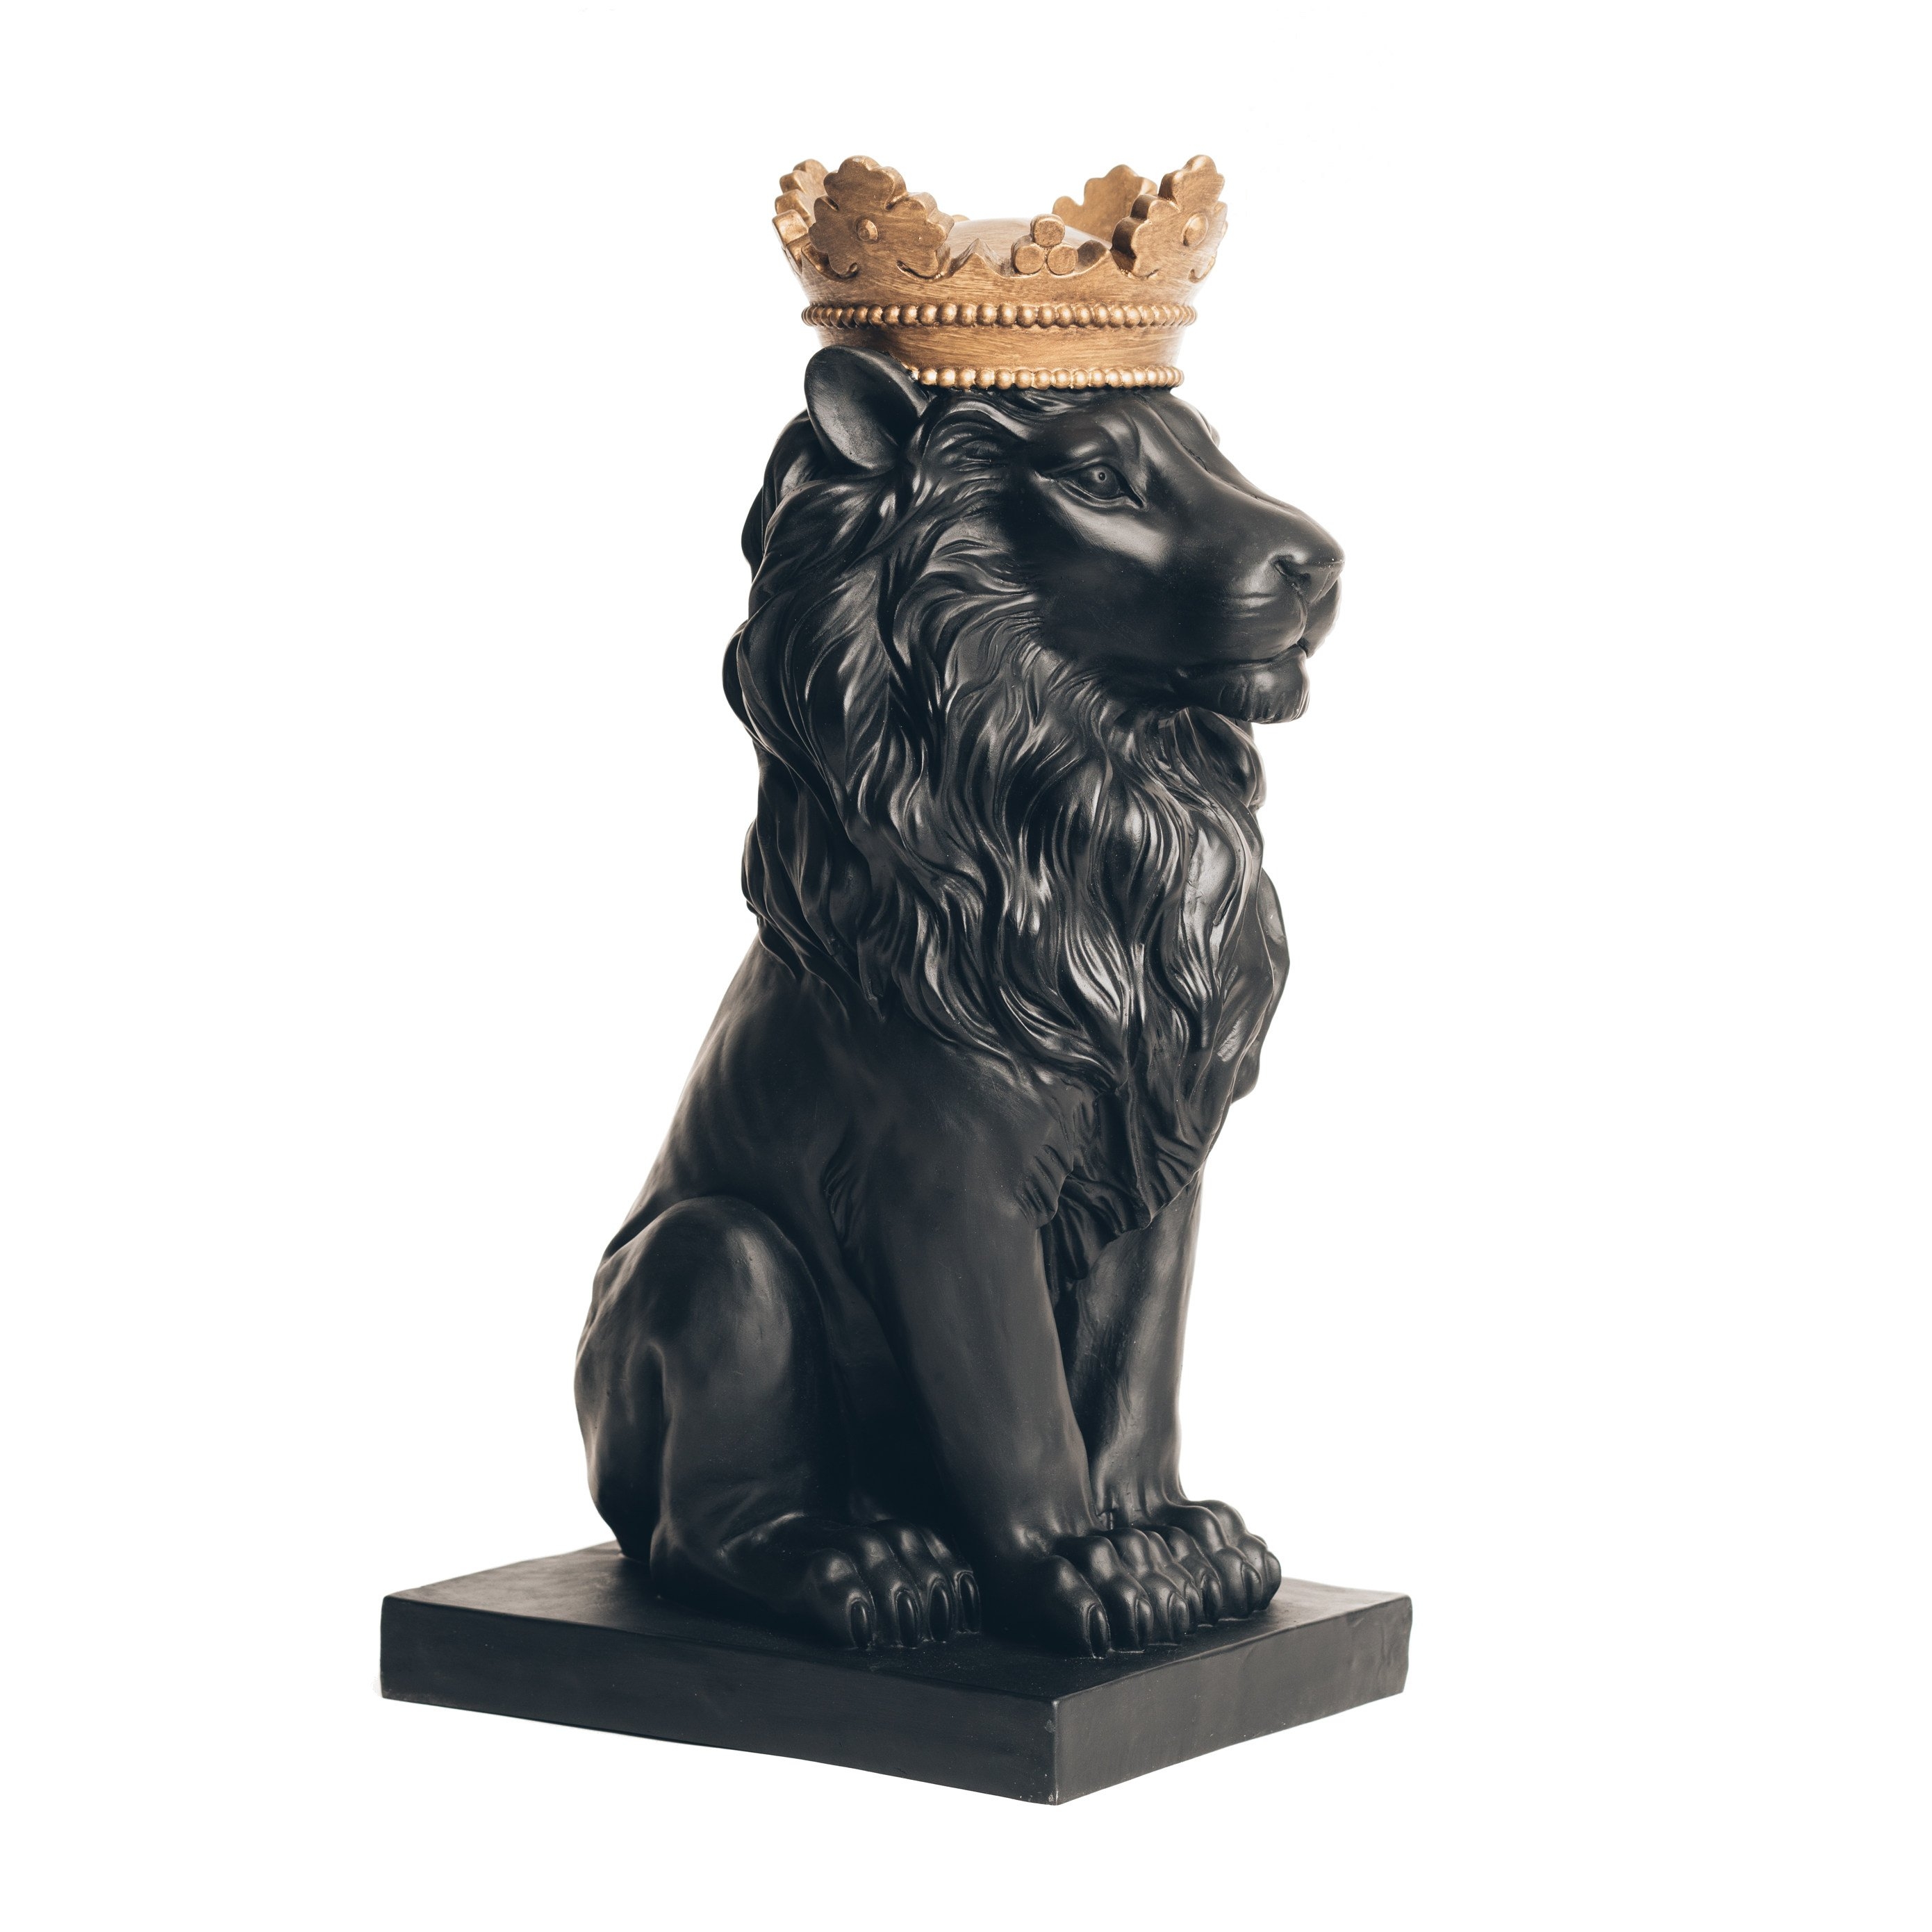 Black Lion with Gold Crown Ornaments